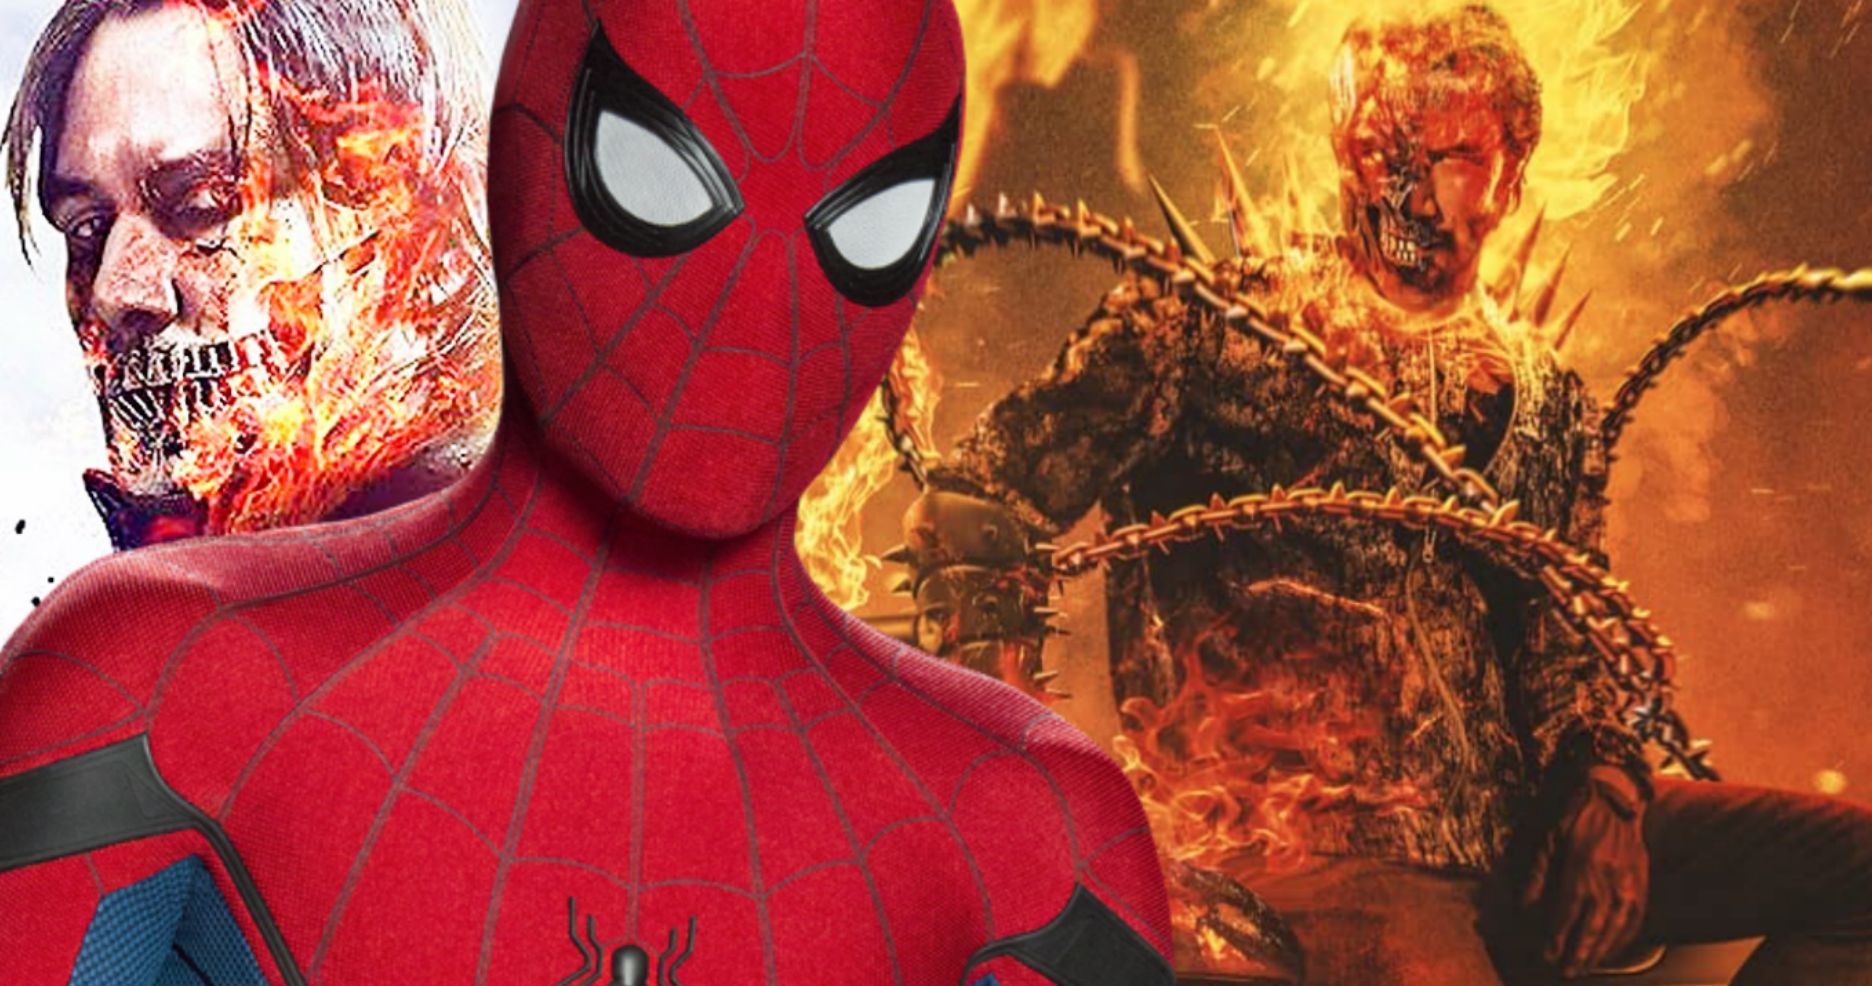 Keanu Reeves' Ghost Rider Meets Spider-Man in Fan-Made Trailer